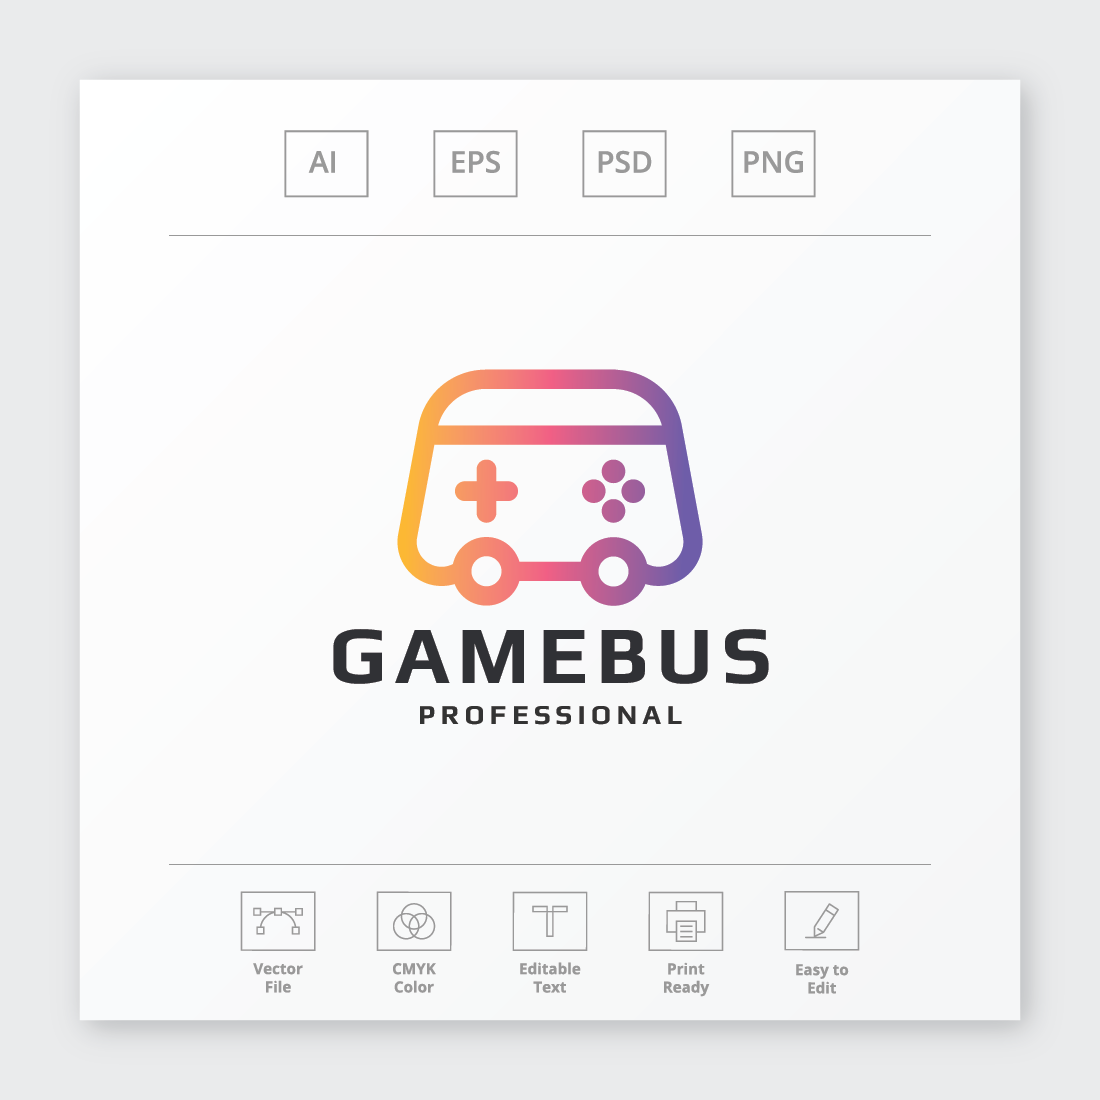 Game Bus Professional Logo cover image.